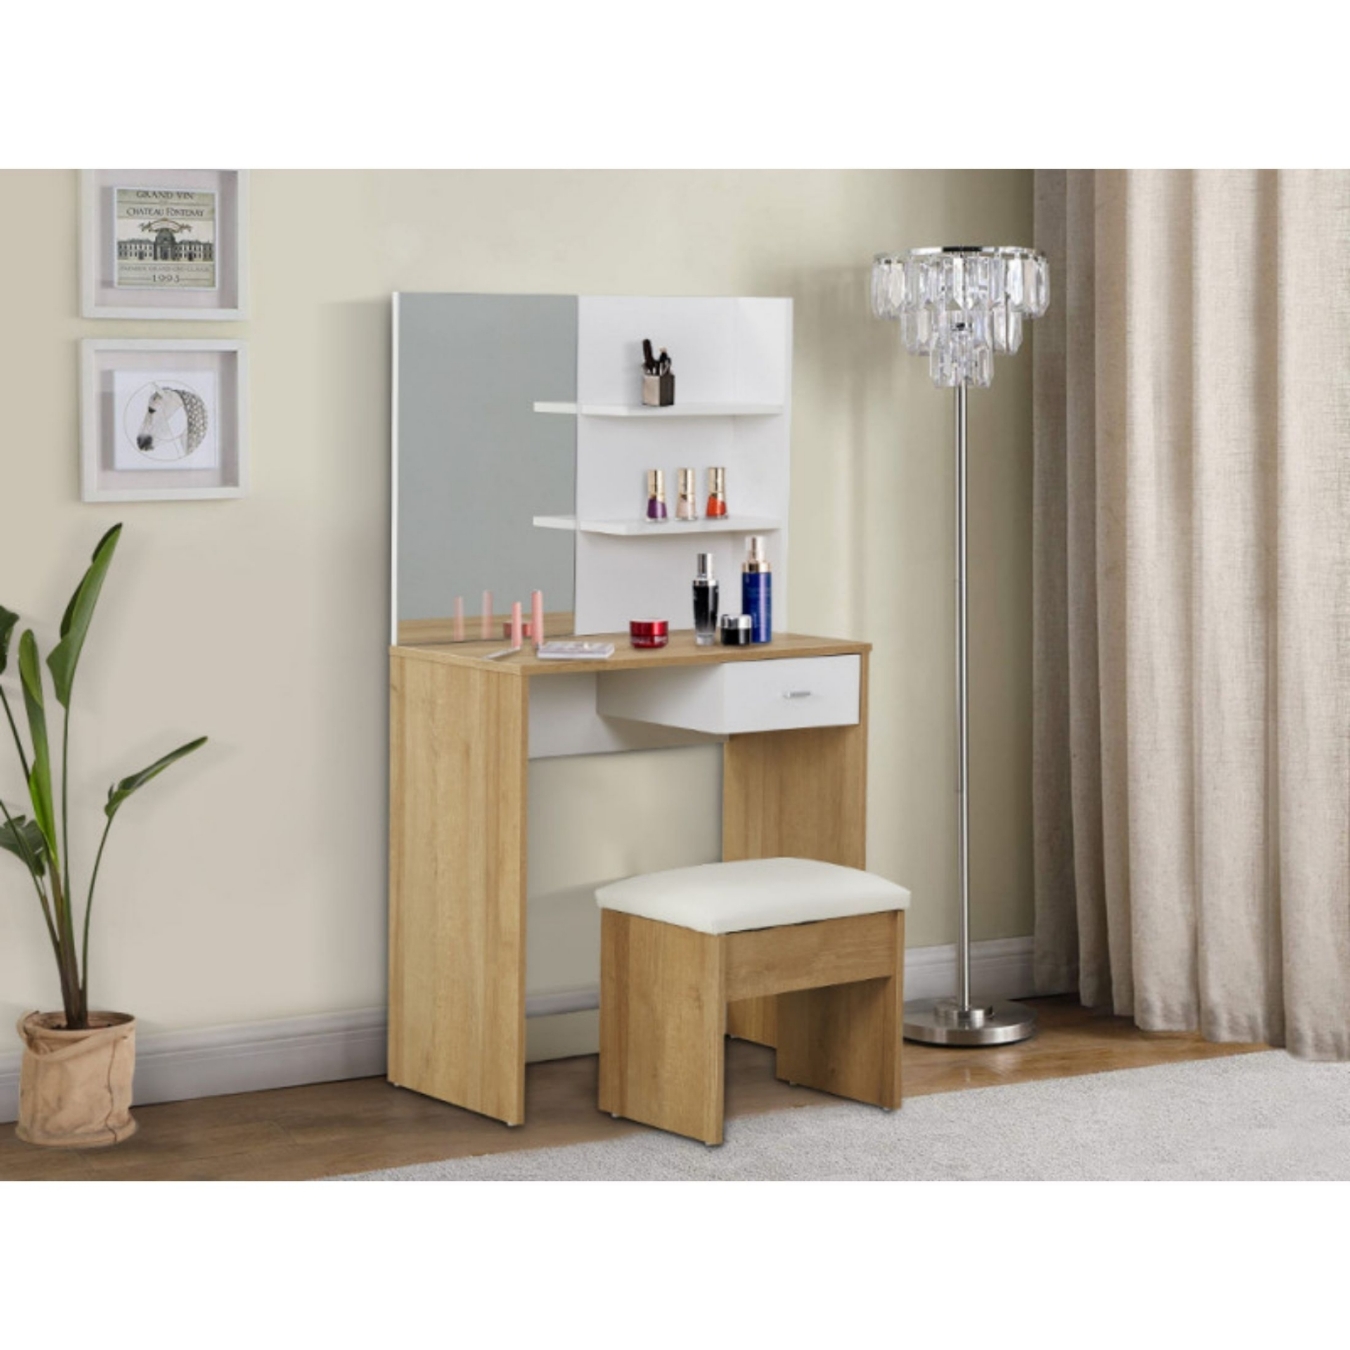 Glebe Dressing Table Set is a simple and modern design along with a timeless look will transform your bedroom into a heaven.